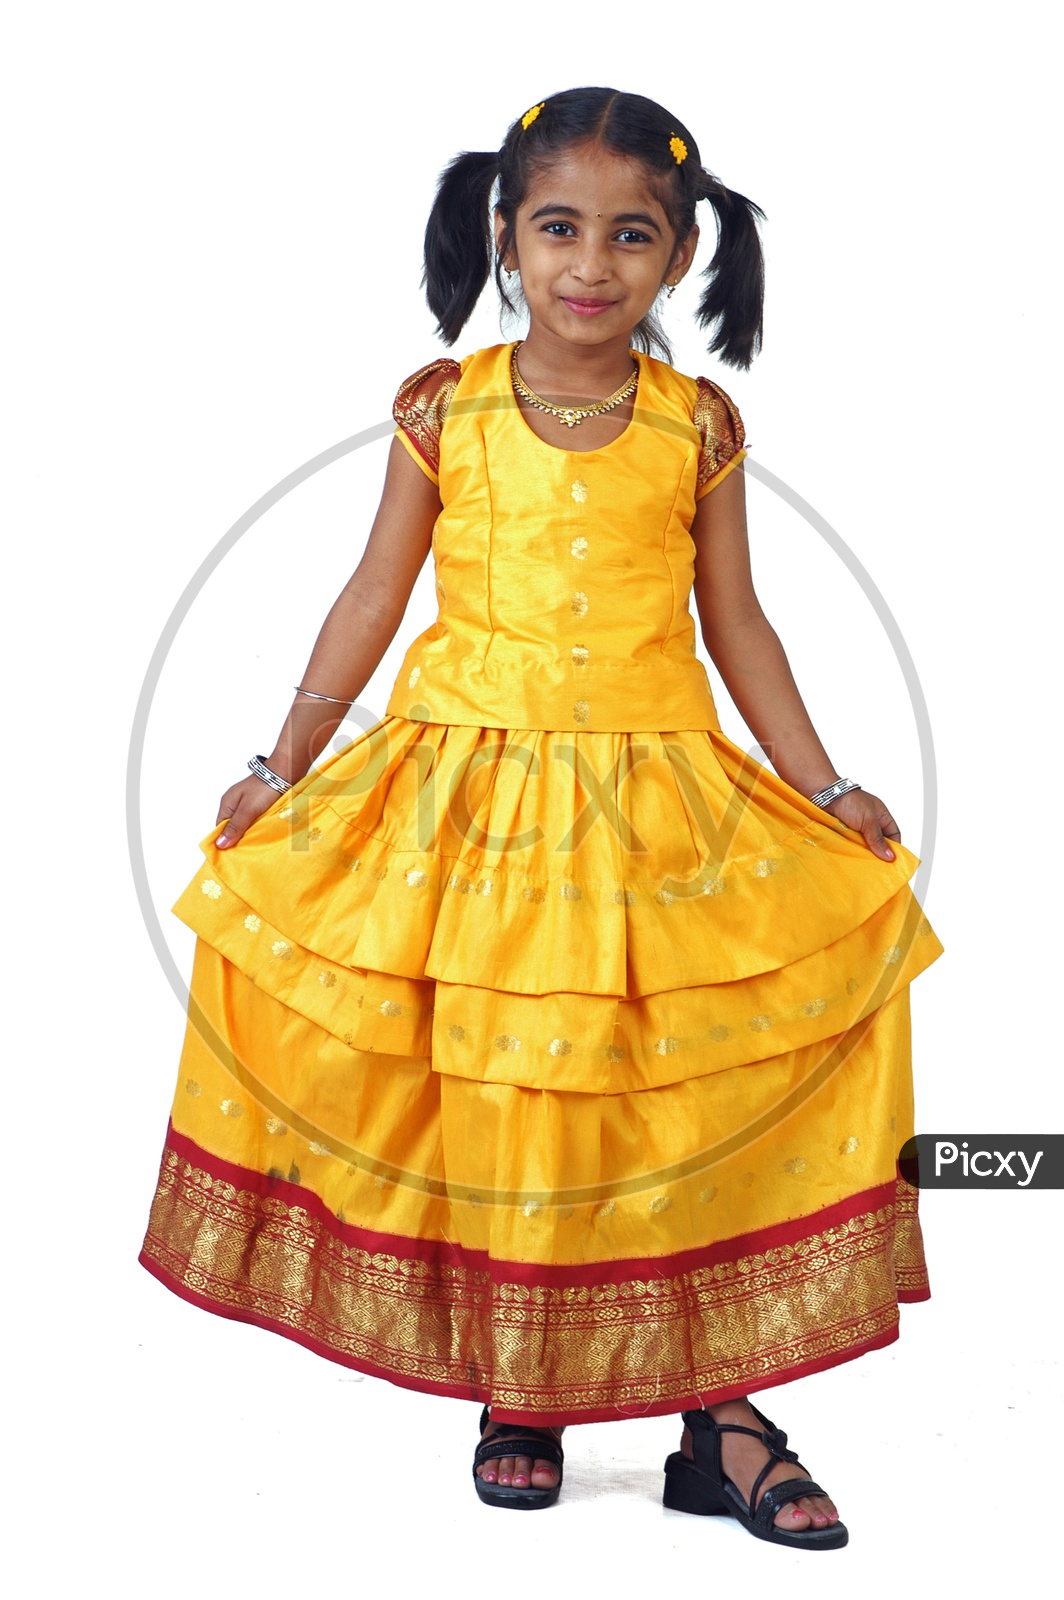 A little girl wearing traditional attire